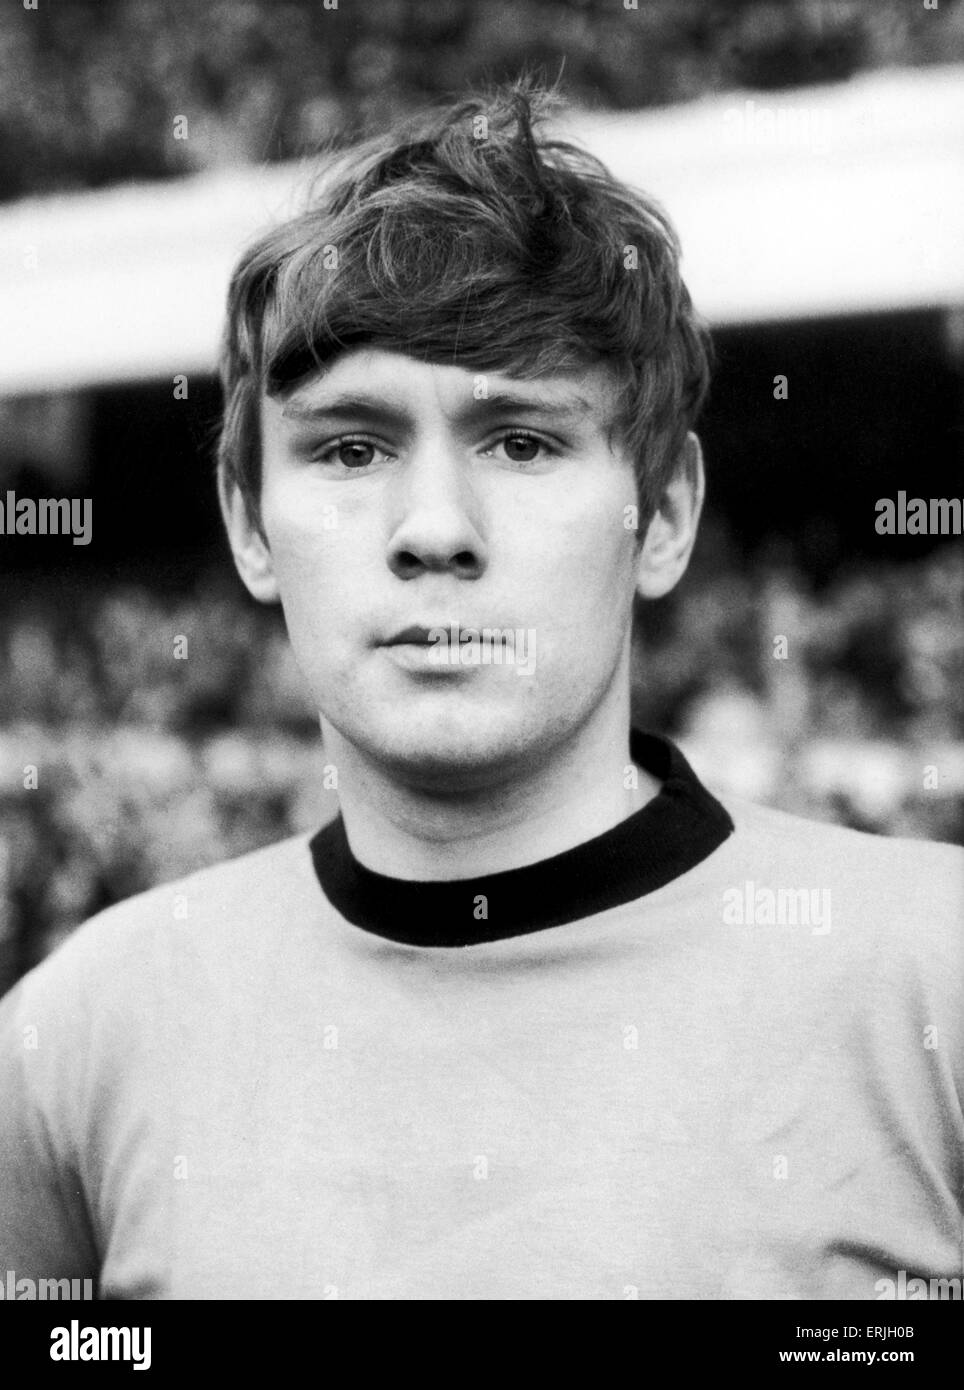 David Wagstaffe is an English former footballer who played the majority of his career for Wolverhampton Wanderers as a left winger. He was known as 'Waggy' to fans and fellow players.David was the first player to receive a red card in English football and be dismissed from the field of play on the day the cards were introduced. Circa January 1965. Stock Photo